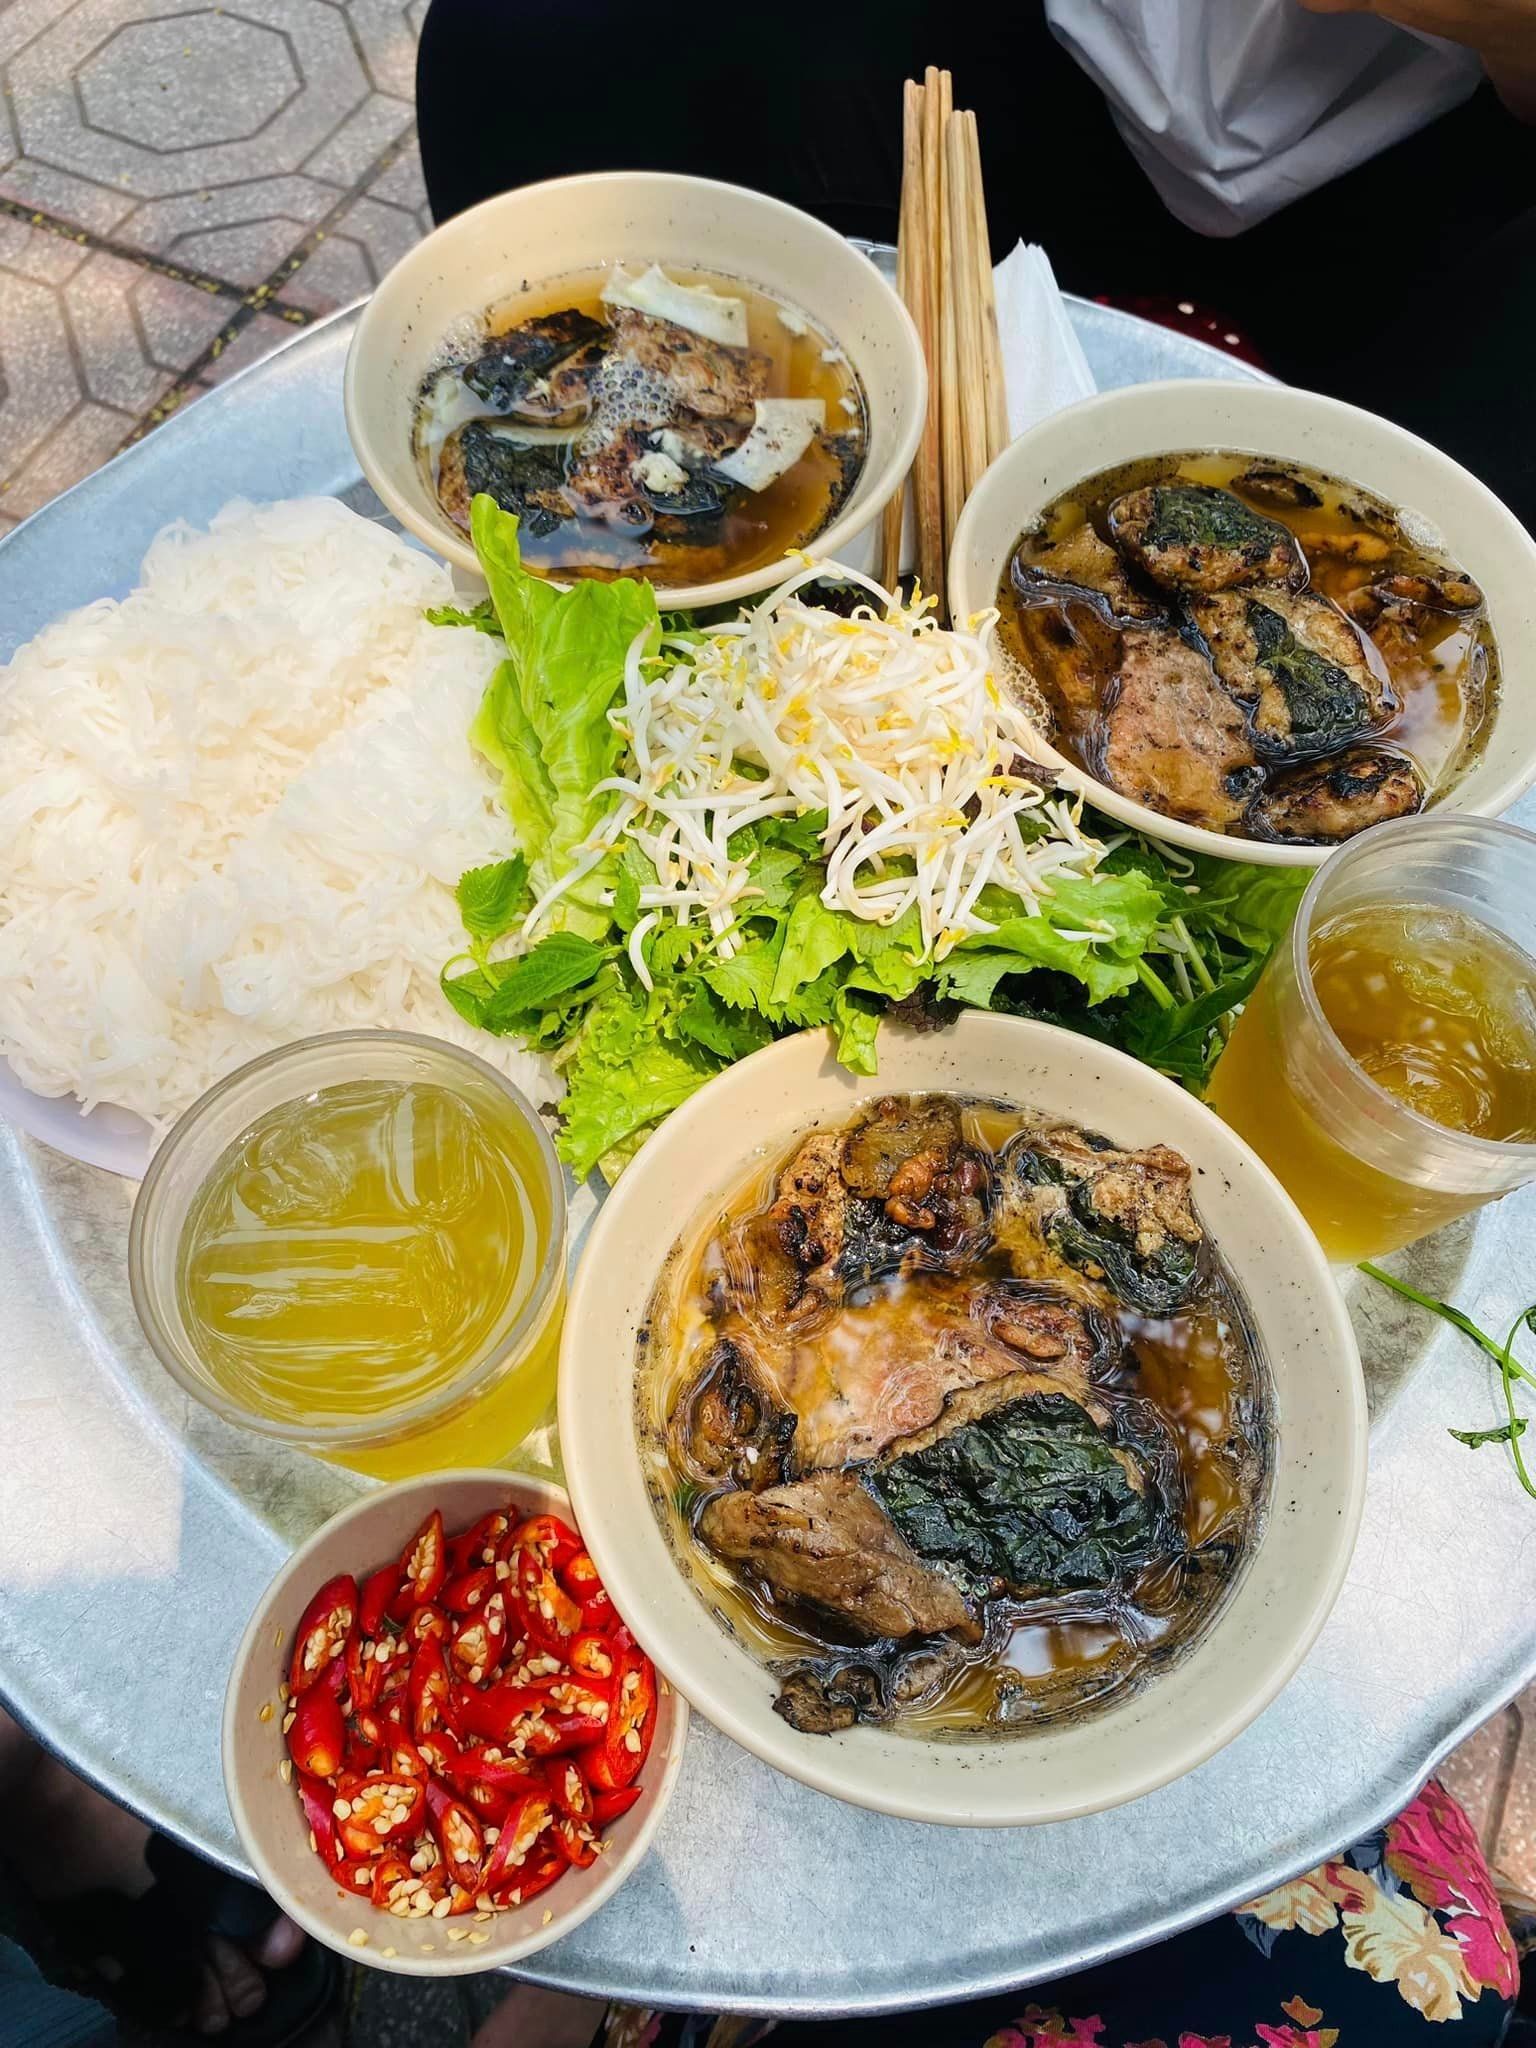 Bun Cha Tuyet, known for its noodles and grilled pork, got recognized by Michelin and now draws more foreign guests